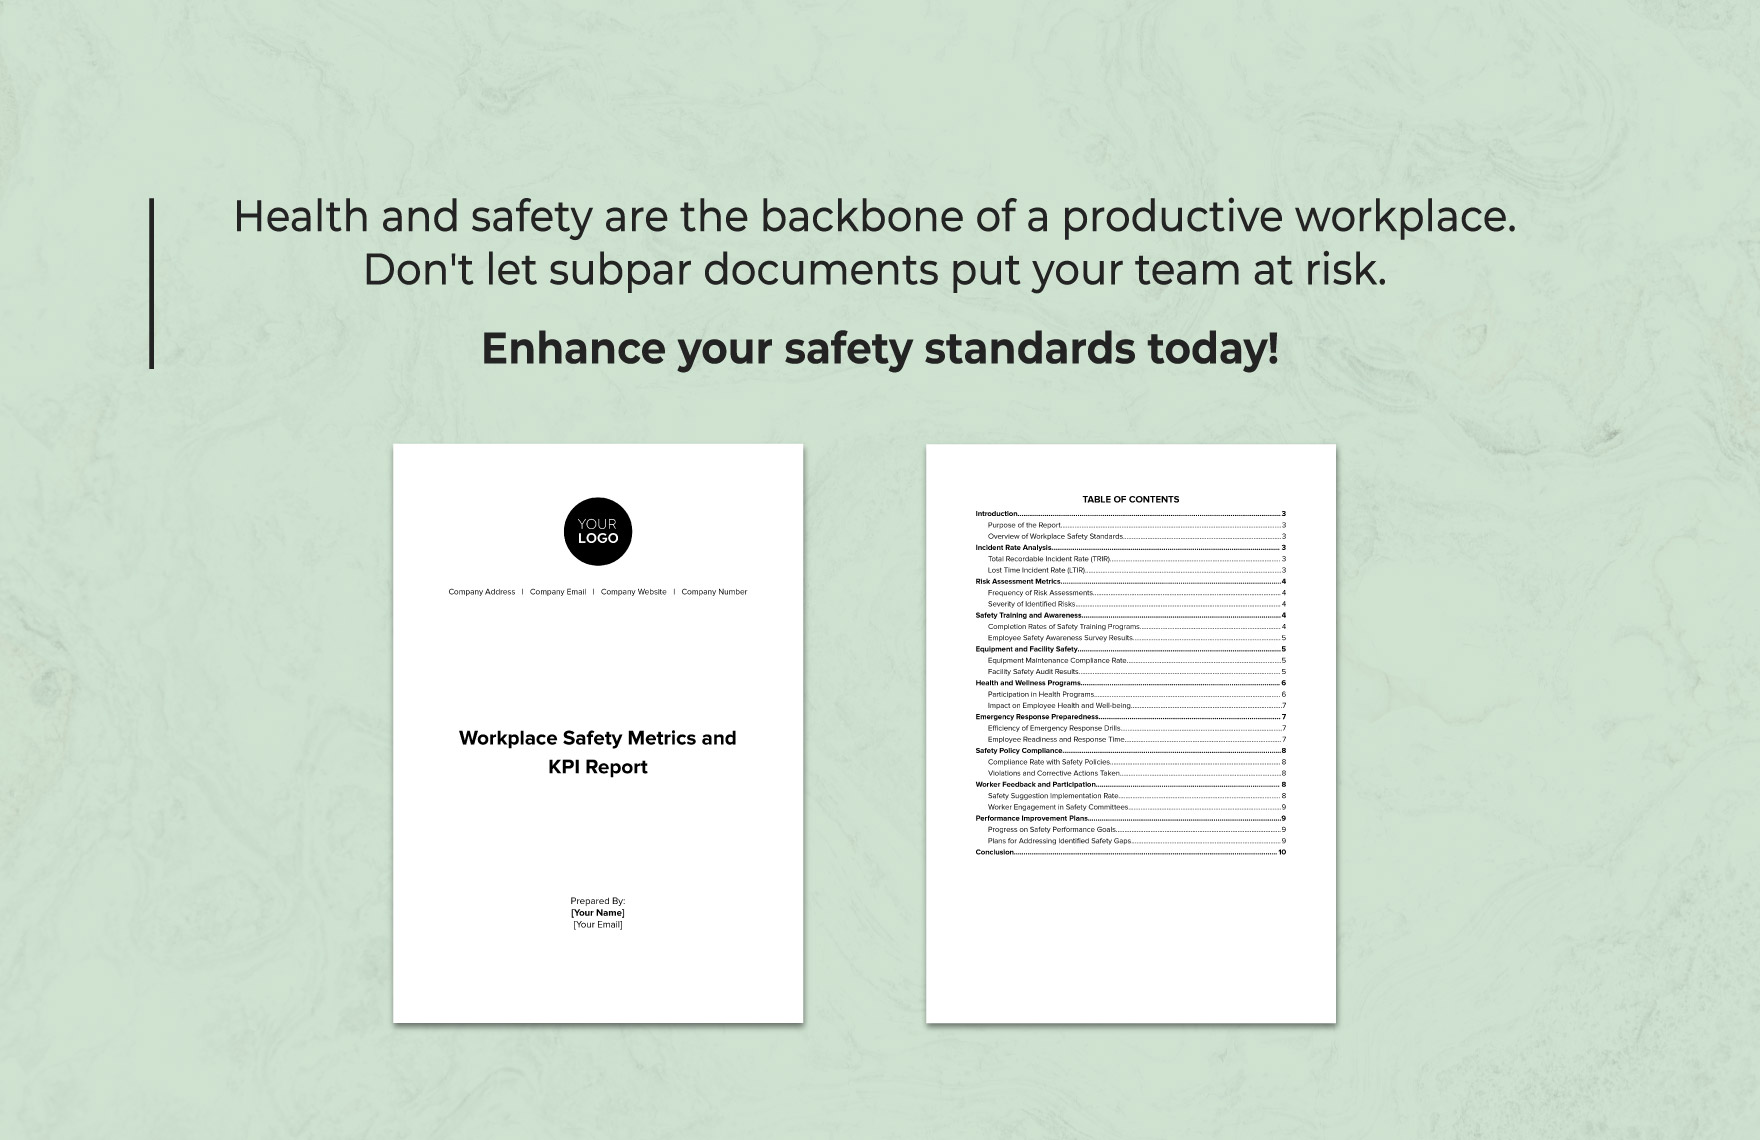 Workplace Safety Metrics and KPI Report Template